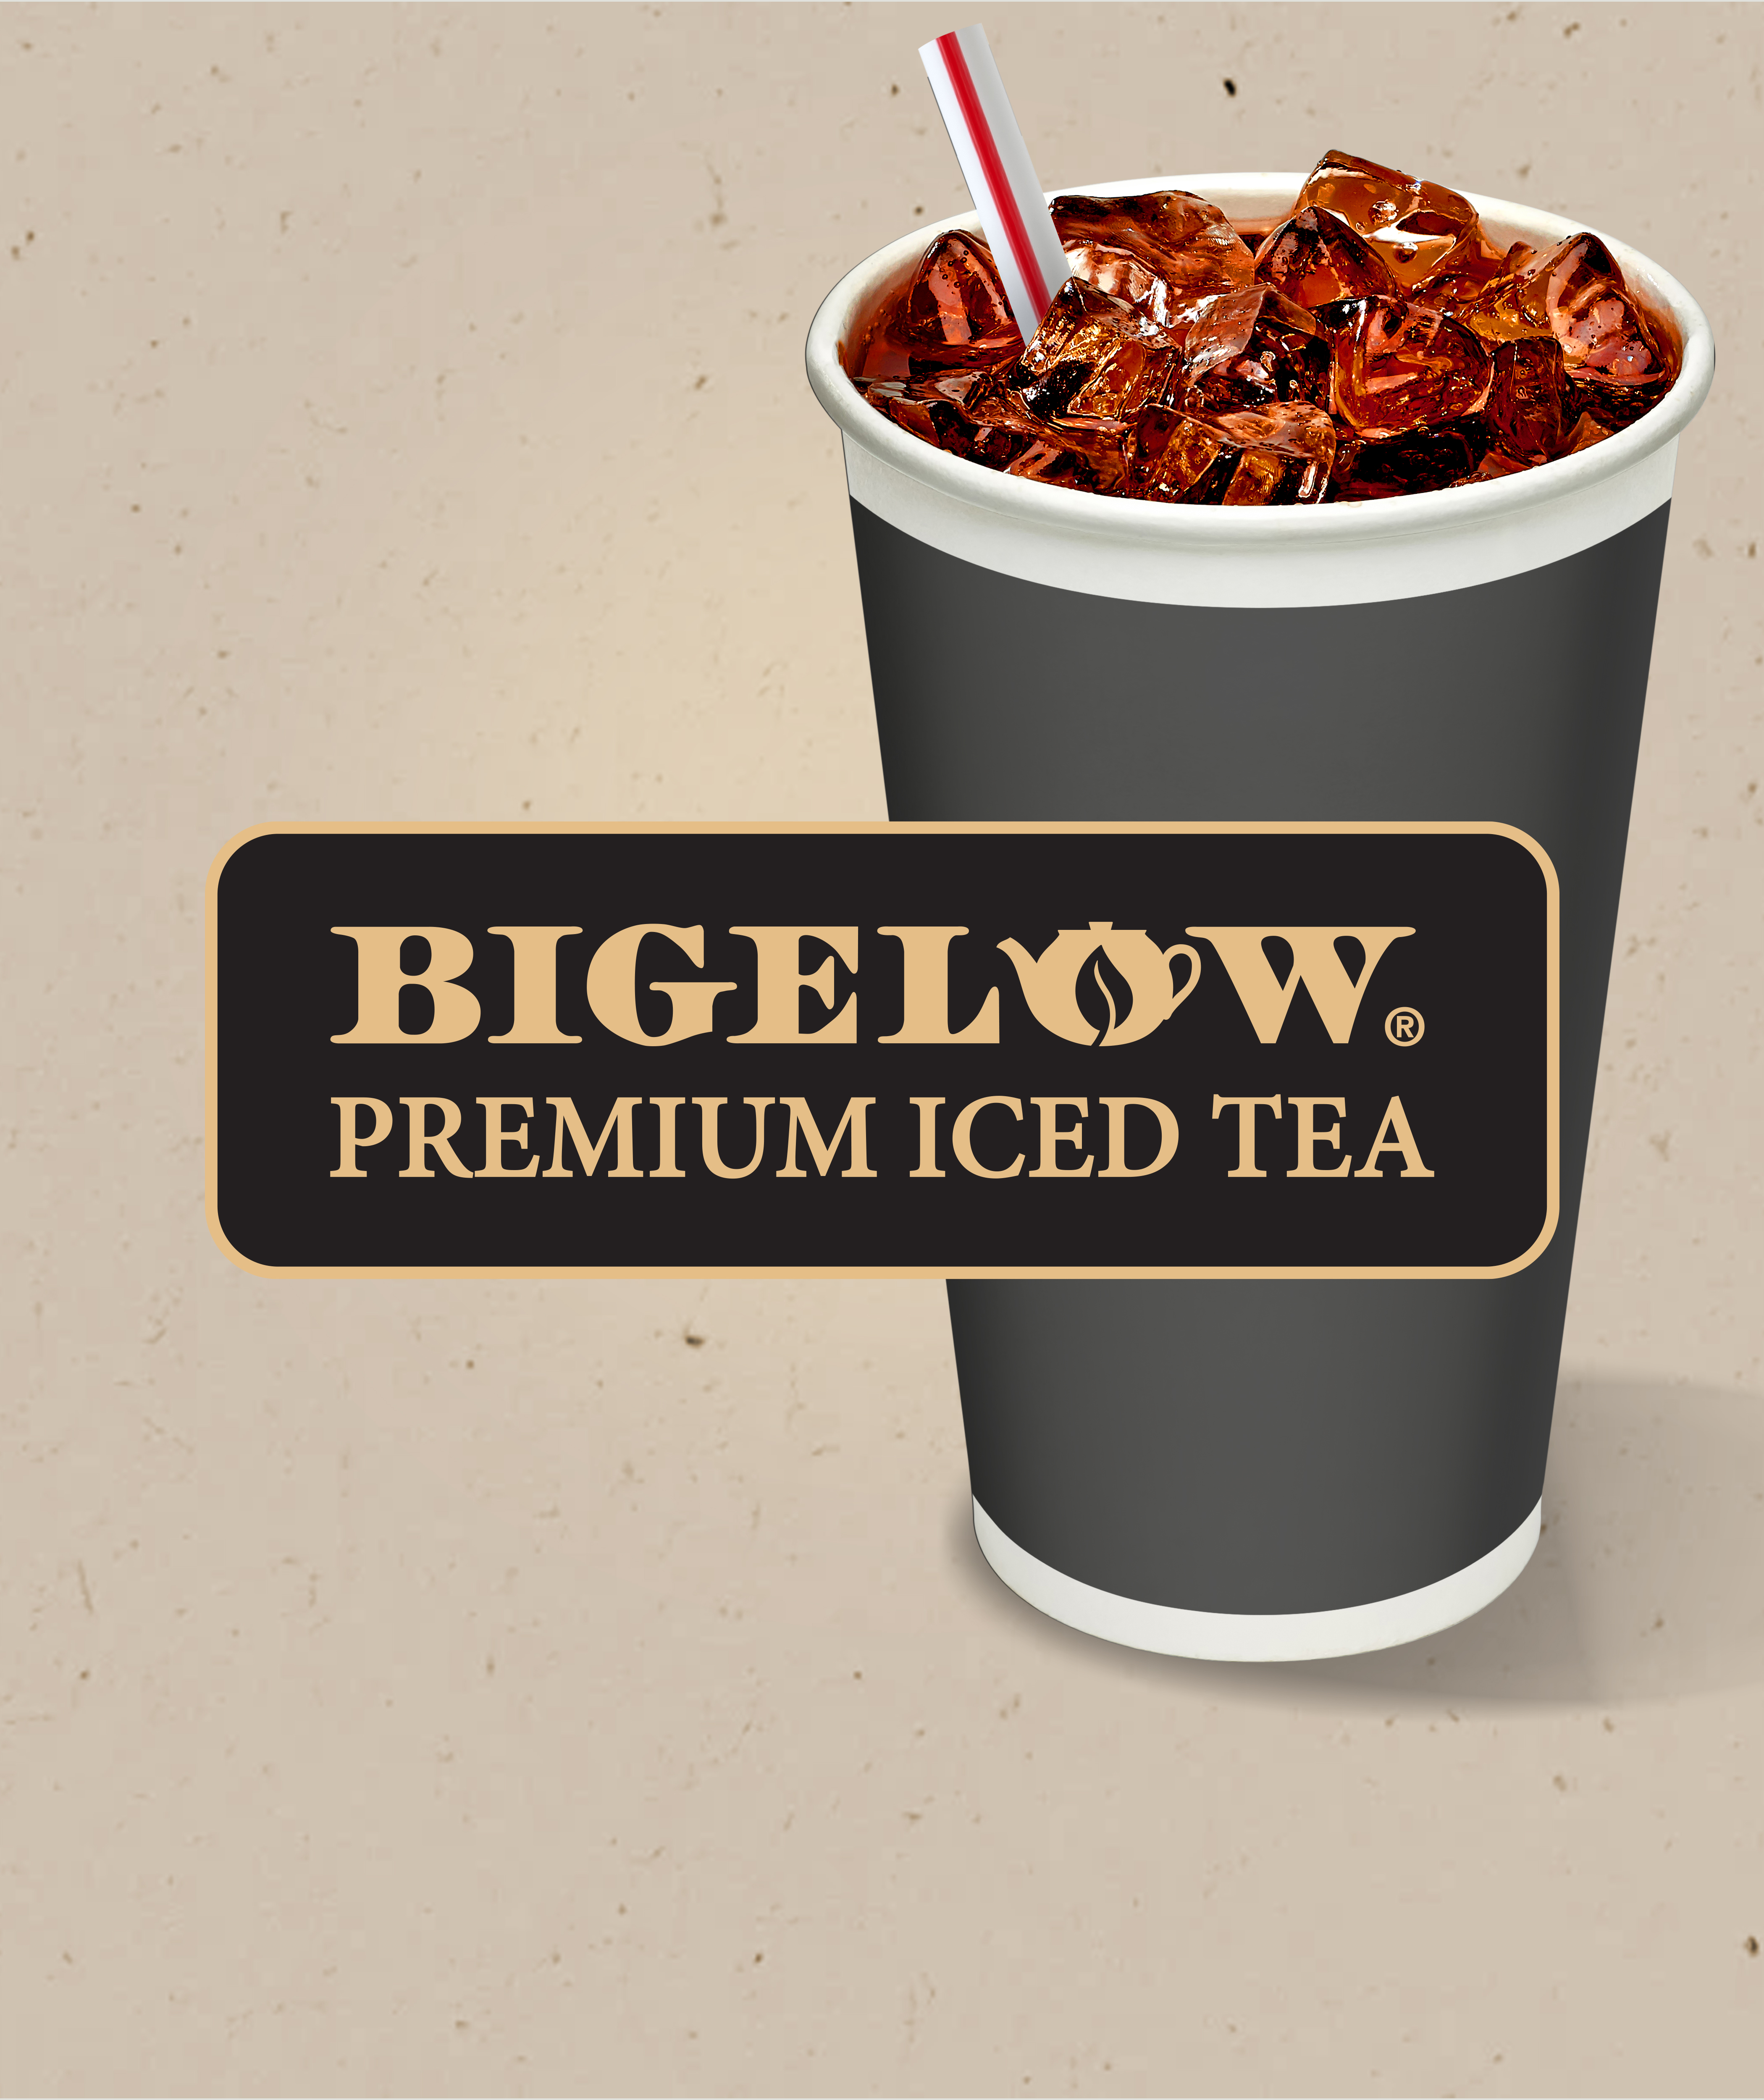 Flavor Smart Nationally Branded Products - Bigelow Premium Iced Tea